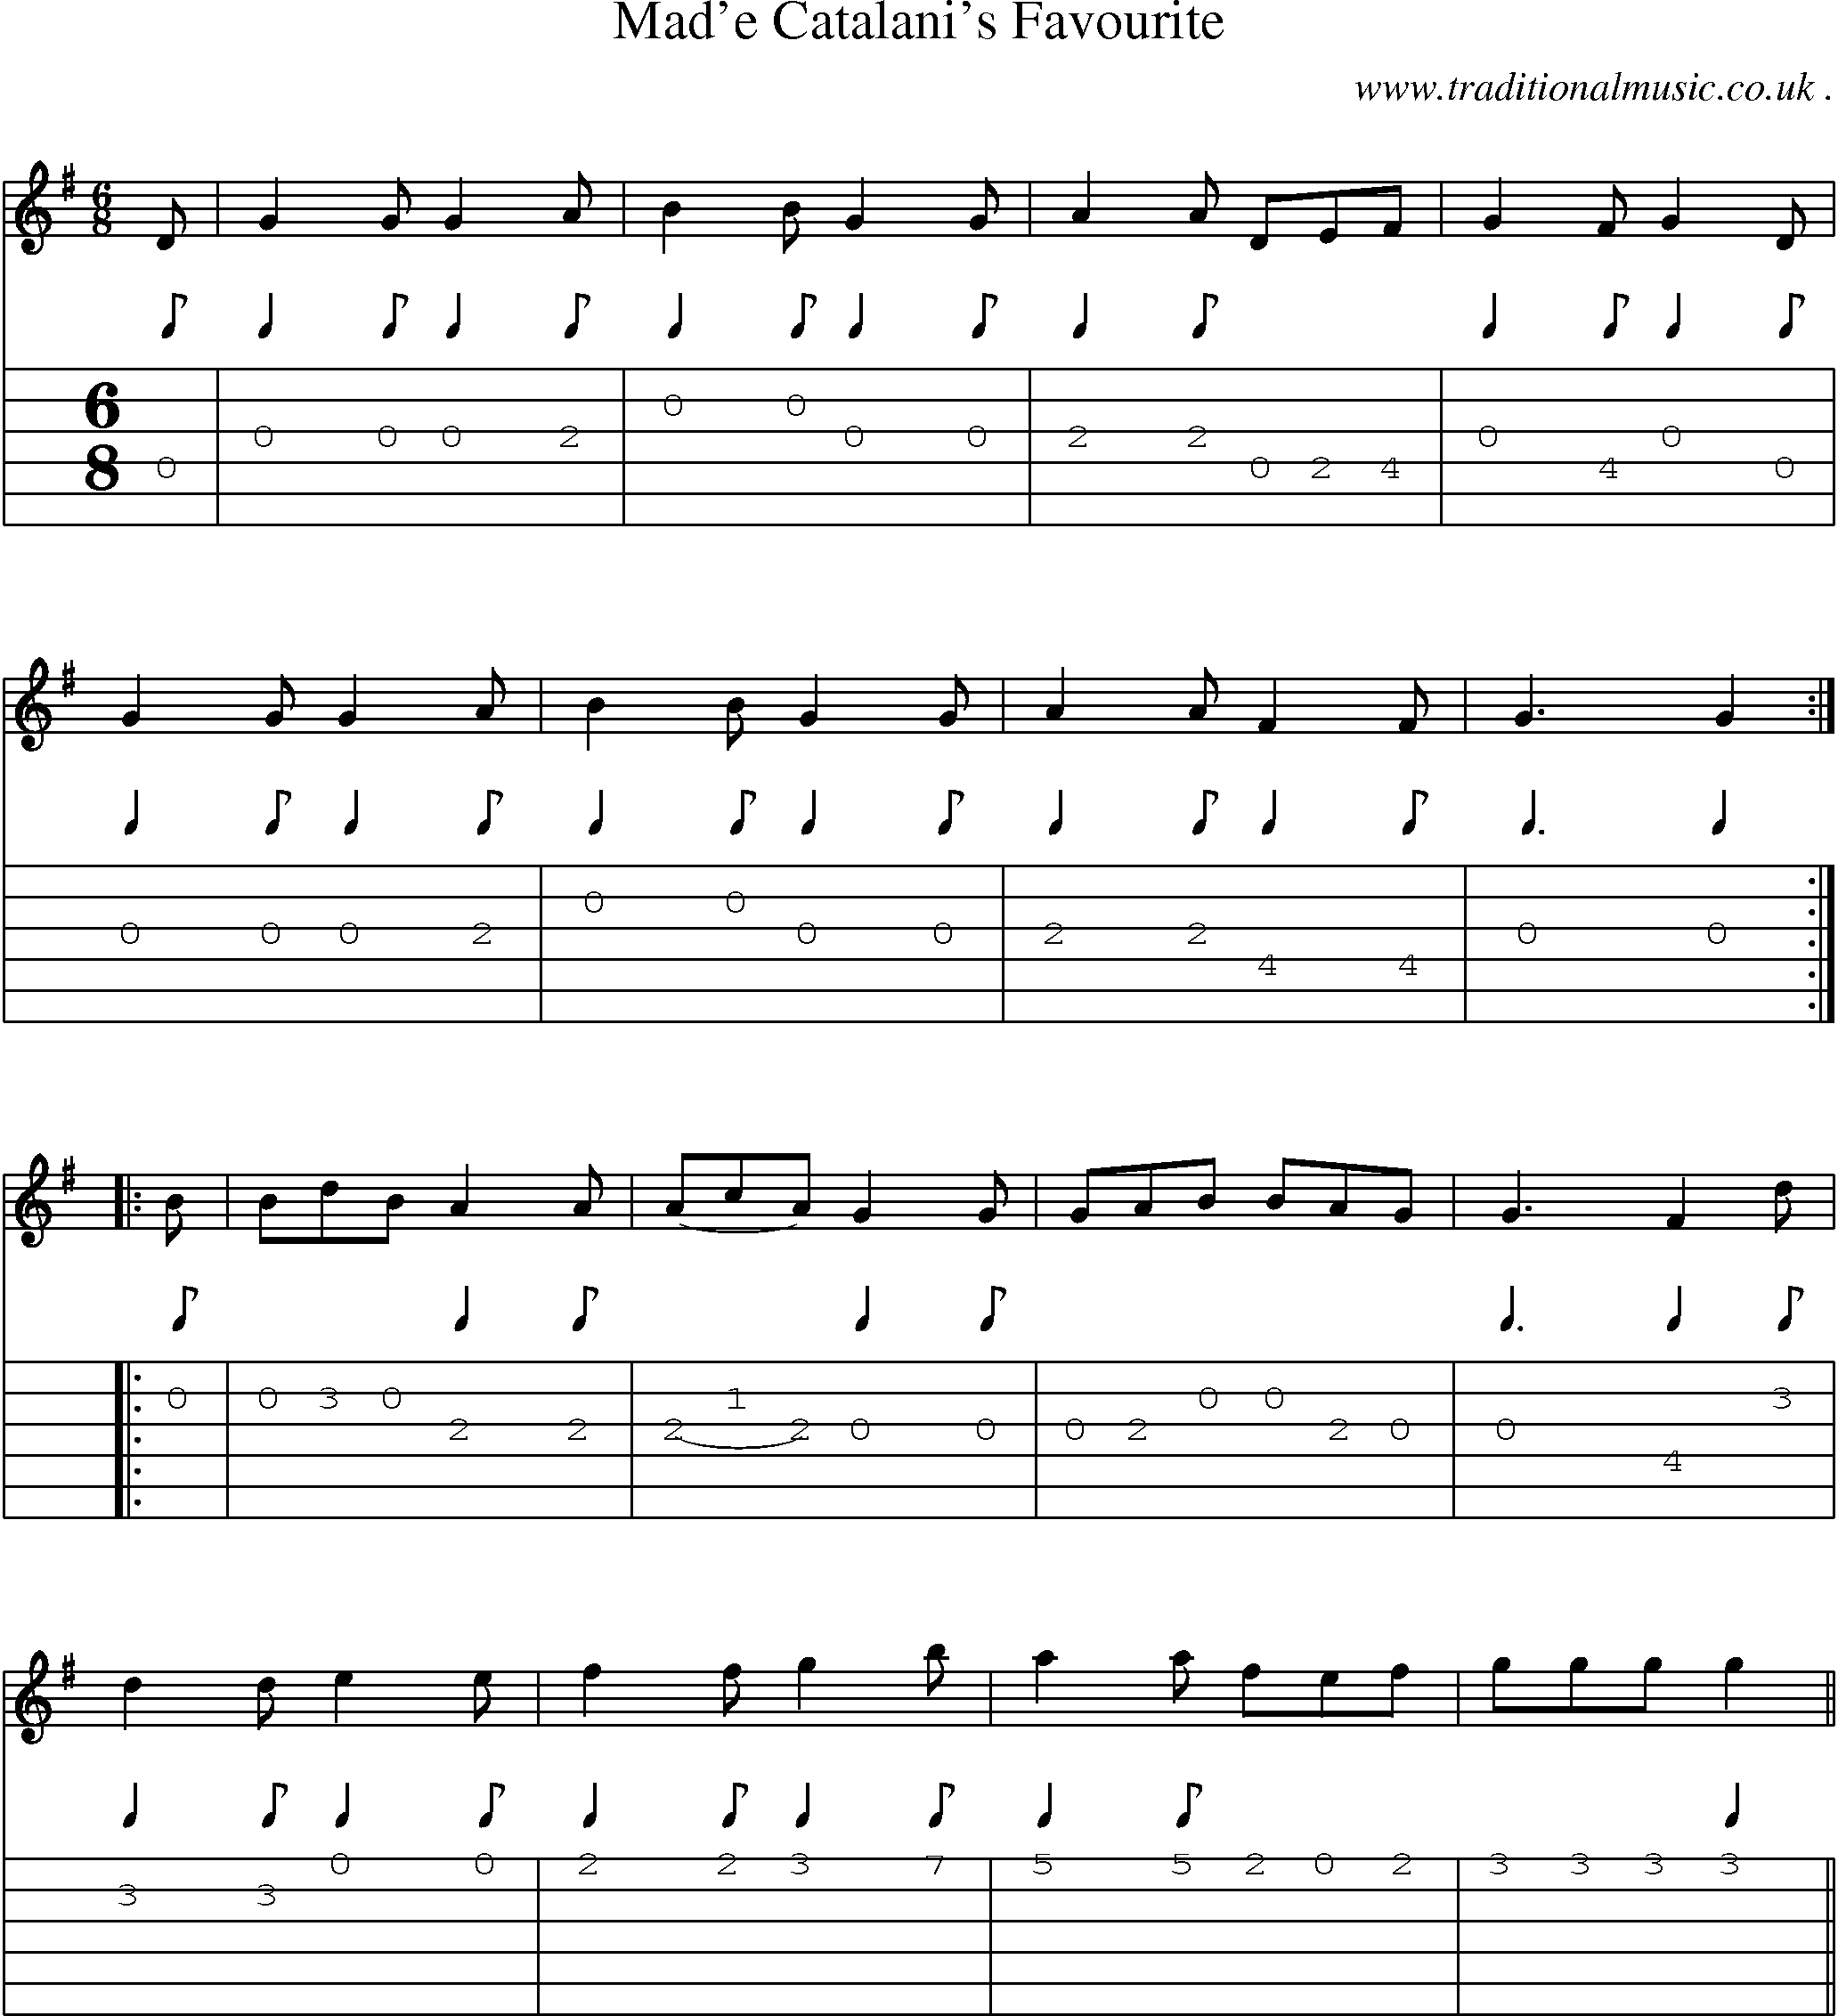 Sheet-Music and Guitar Tabs for Made Catalanis Favourite